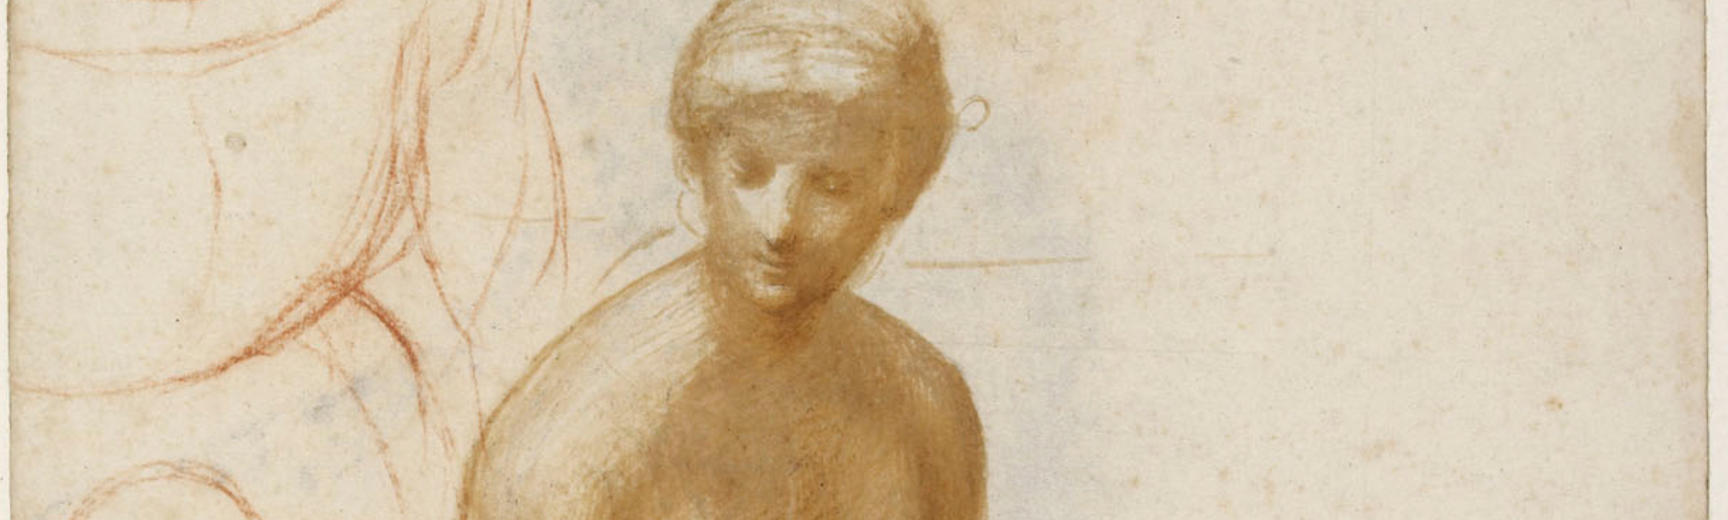 Drawing of mother and child by Raphael